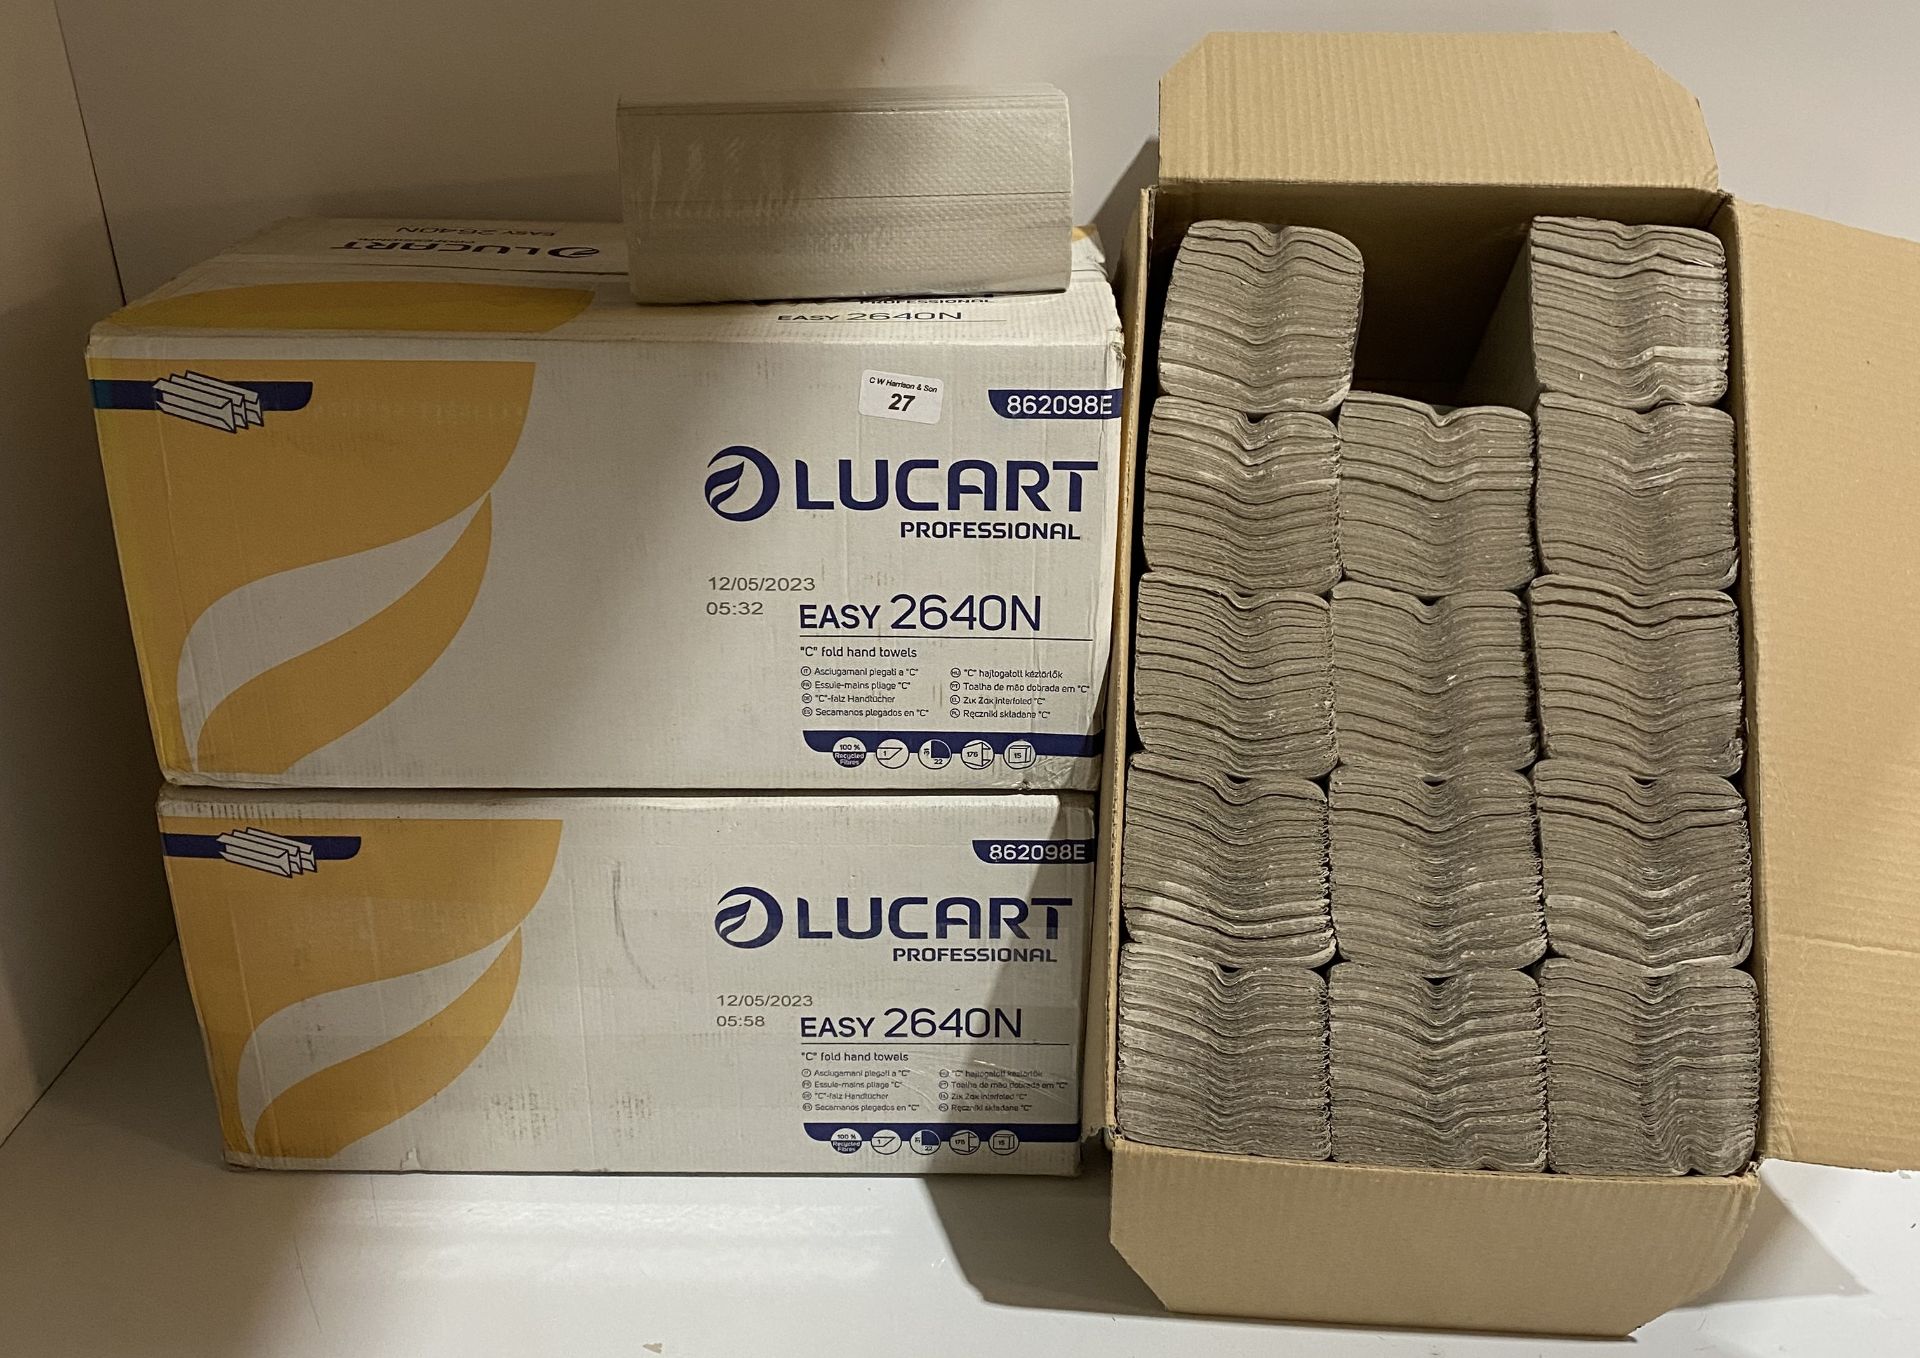 3 x boxes of 15 sleeves each with 176 per sheet C fold Lucart 1 ply paper hand towel (saleroom